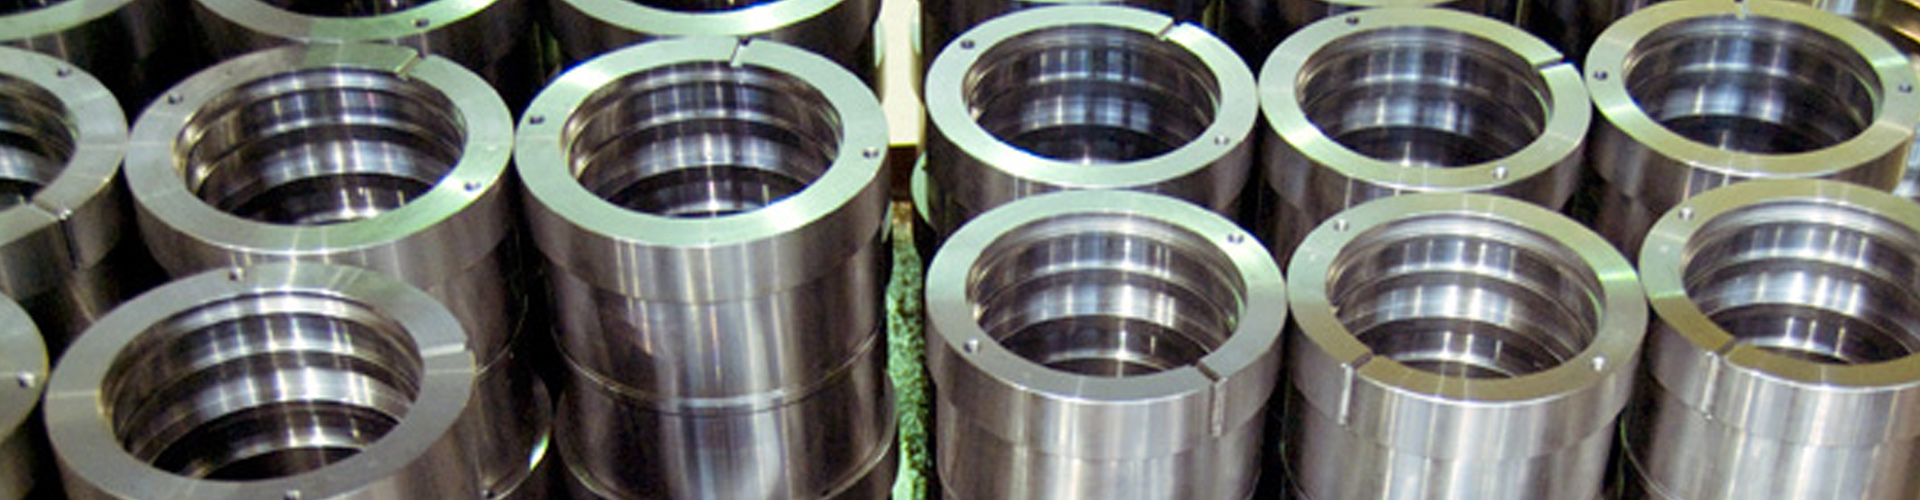 Commissioning and Service Information for Telescopic Cylinders, Series 3PL